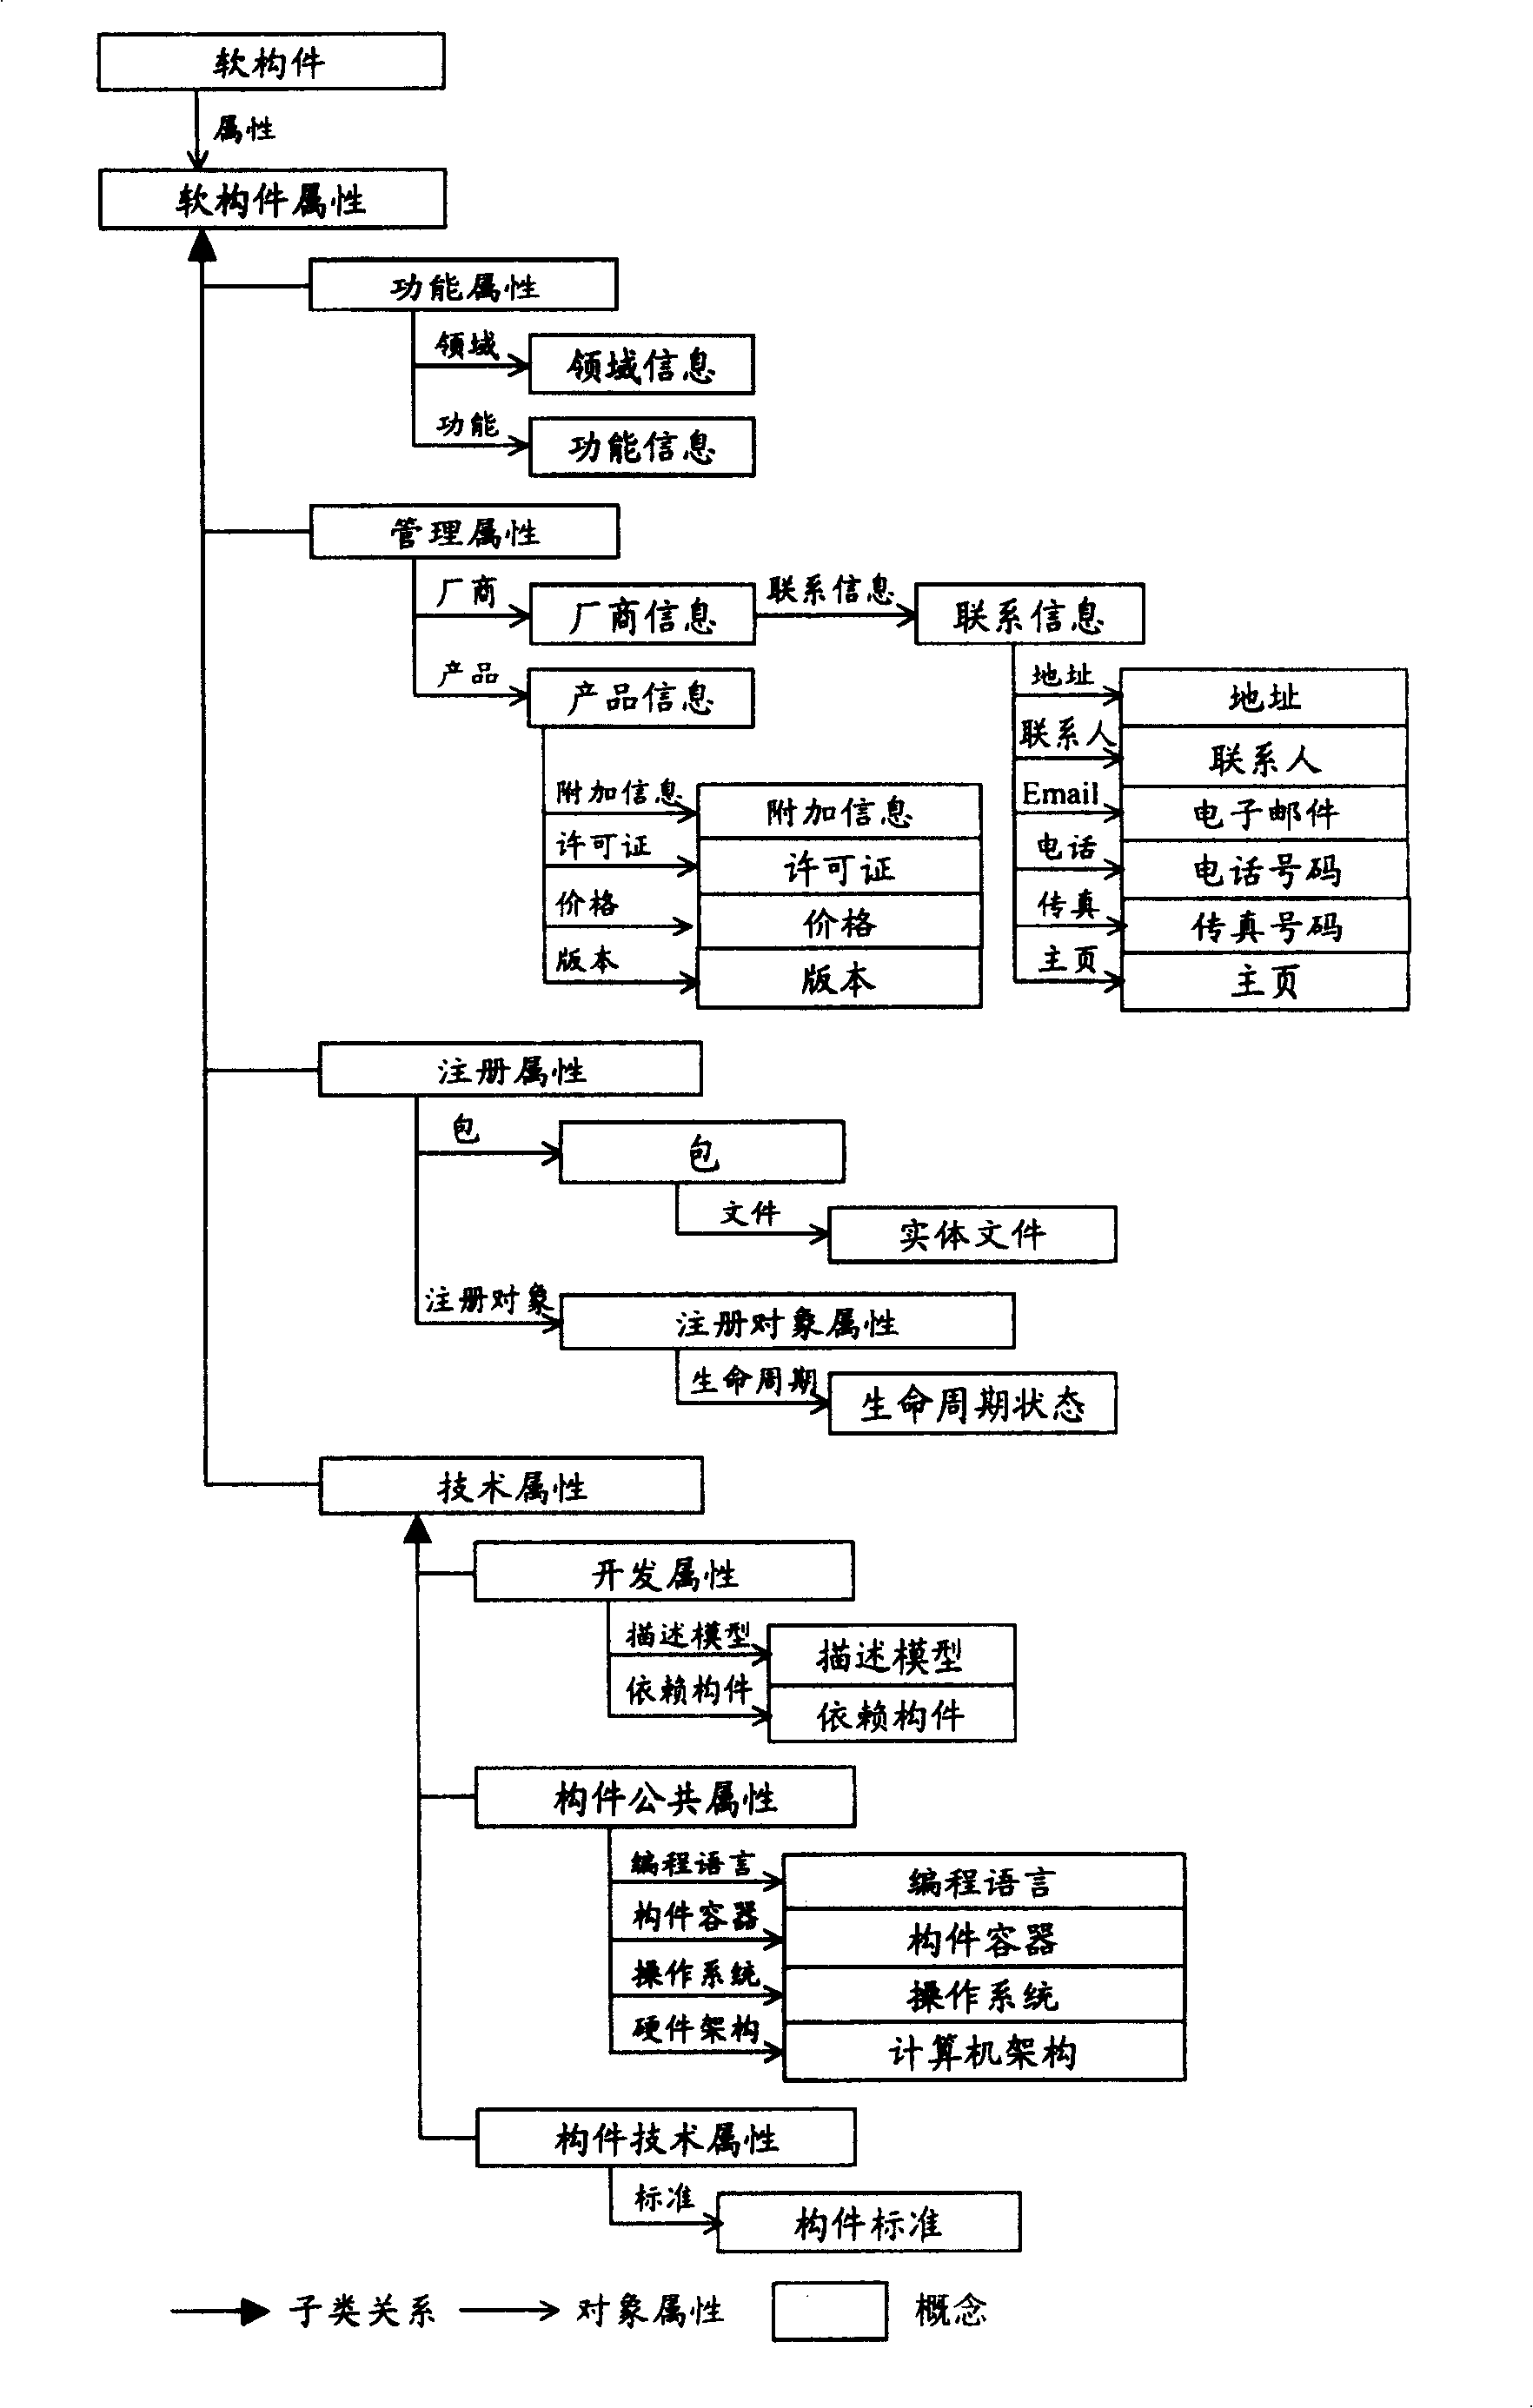 Software component classification registration method based on domain body